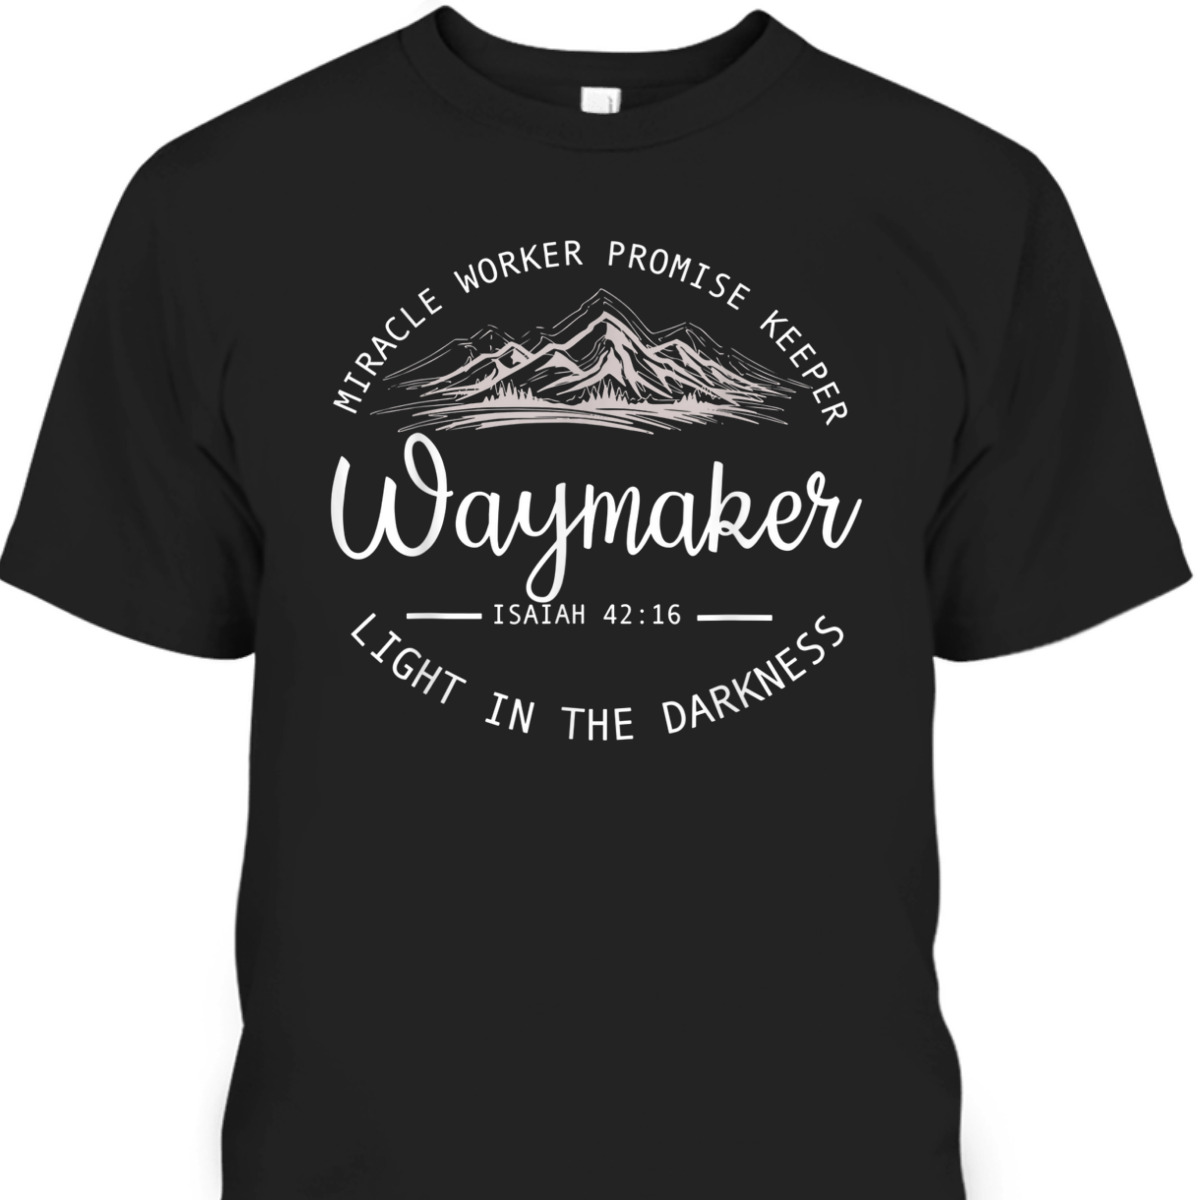 Waymaker Promise Keeper T-Shirt Miracle Worker Isaiah 42:16 Light In The Darkness